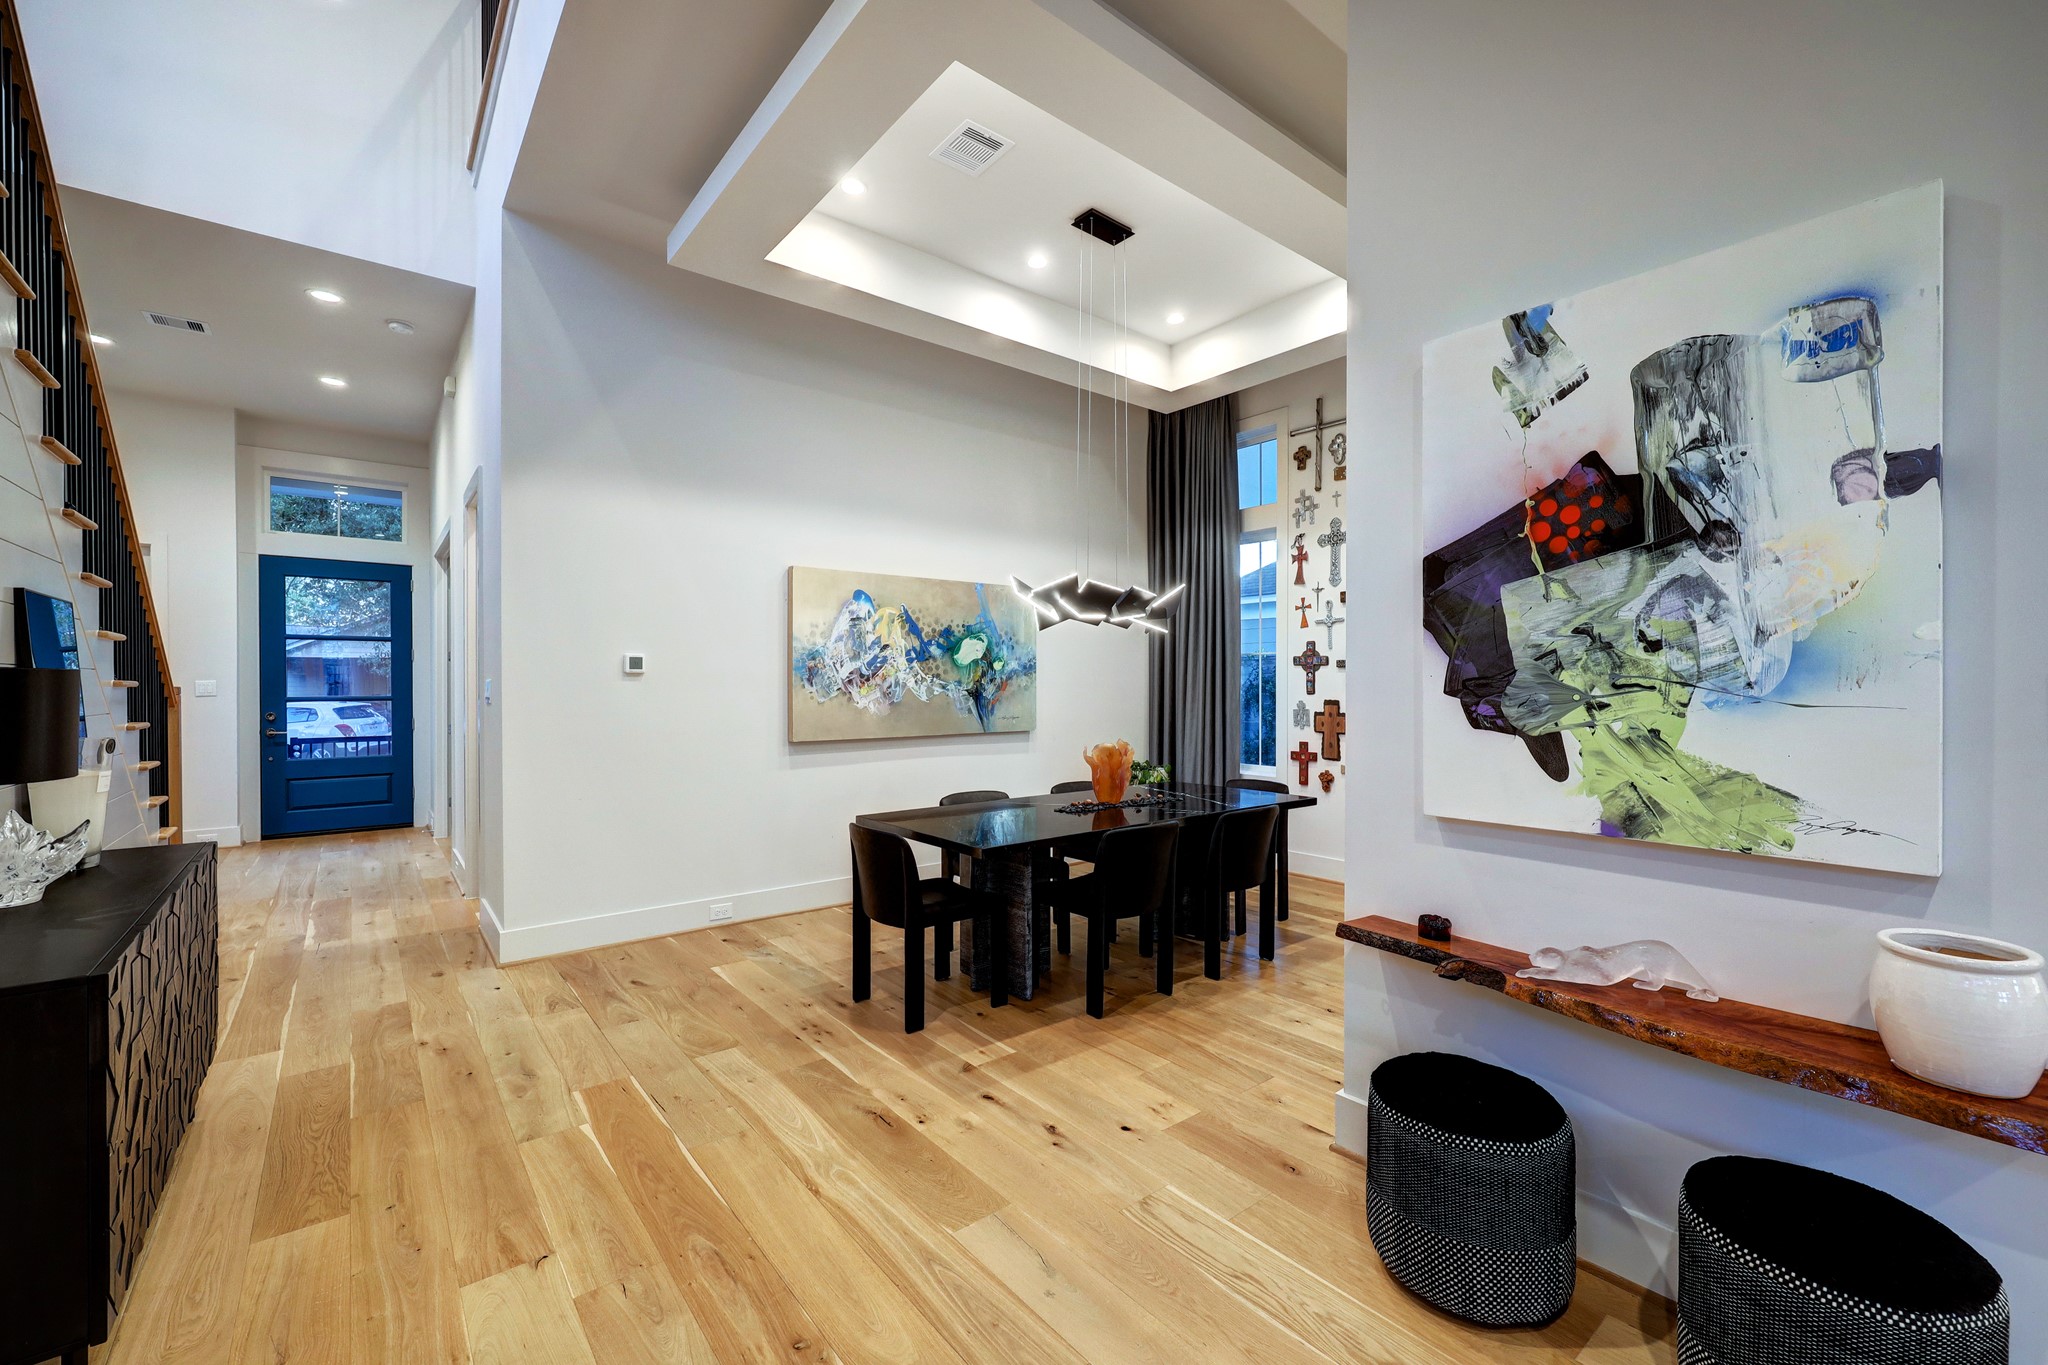 Wide art walls and soaring ceilings provide the perfect setting for your prized collection.